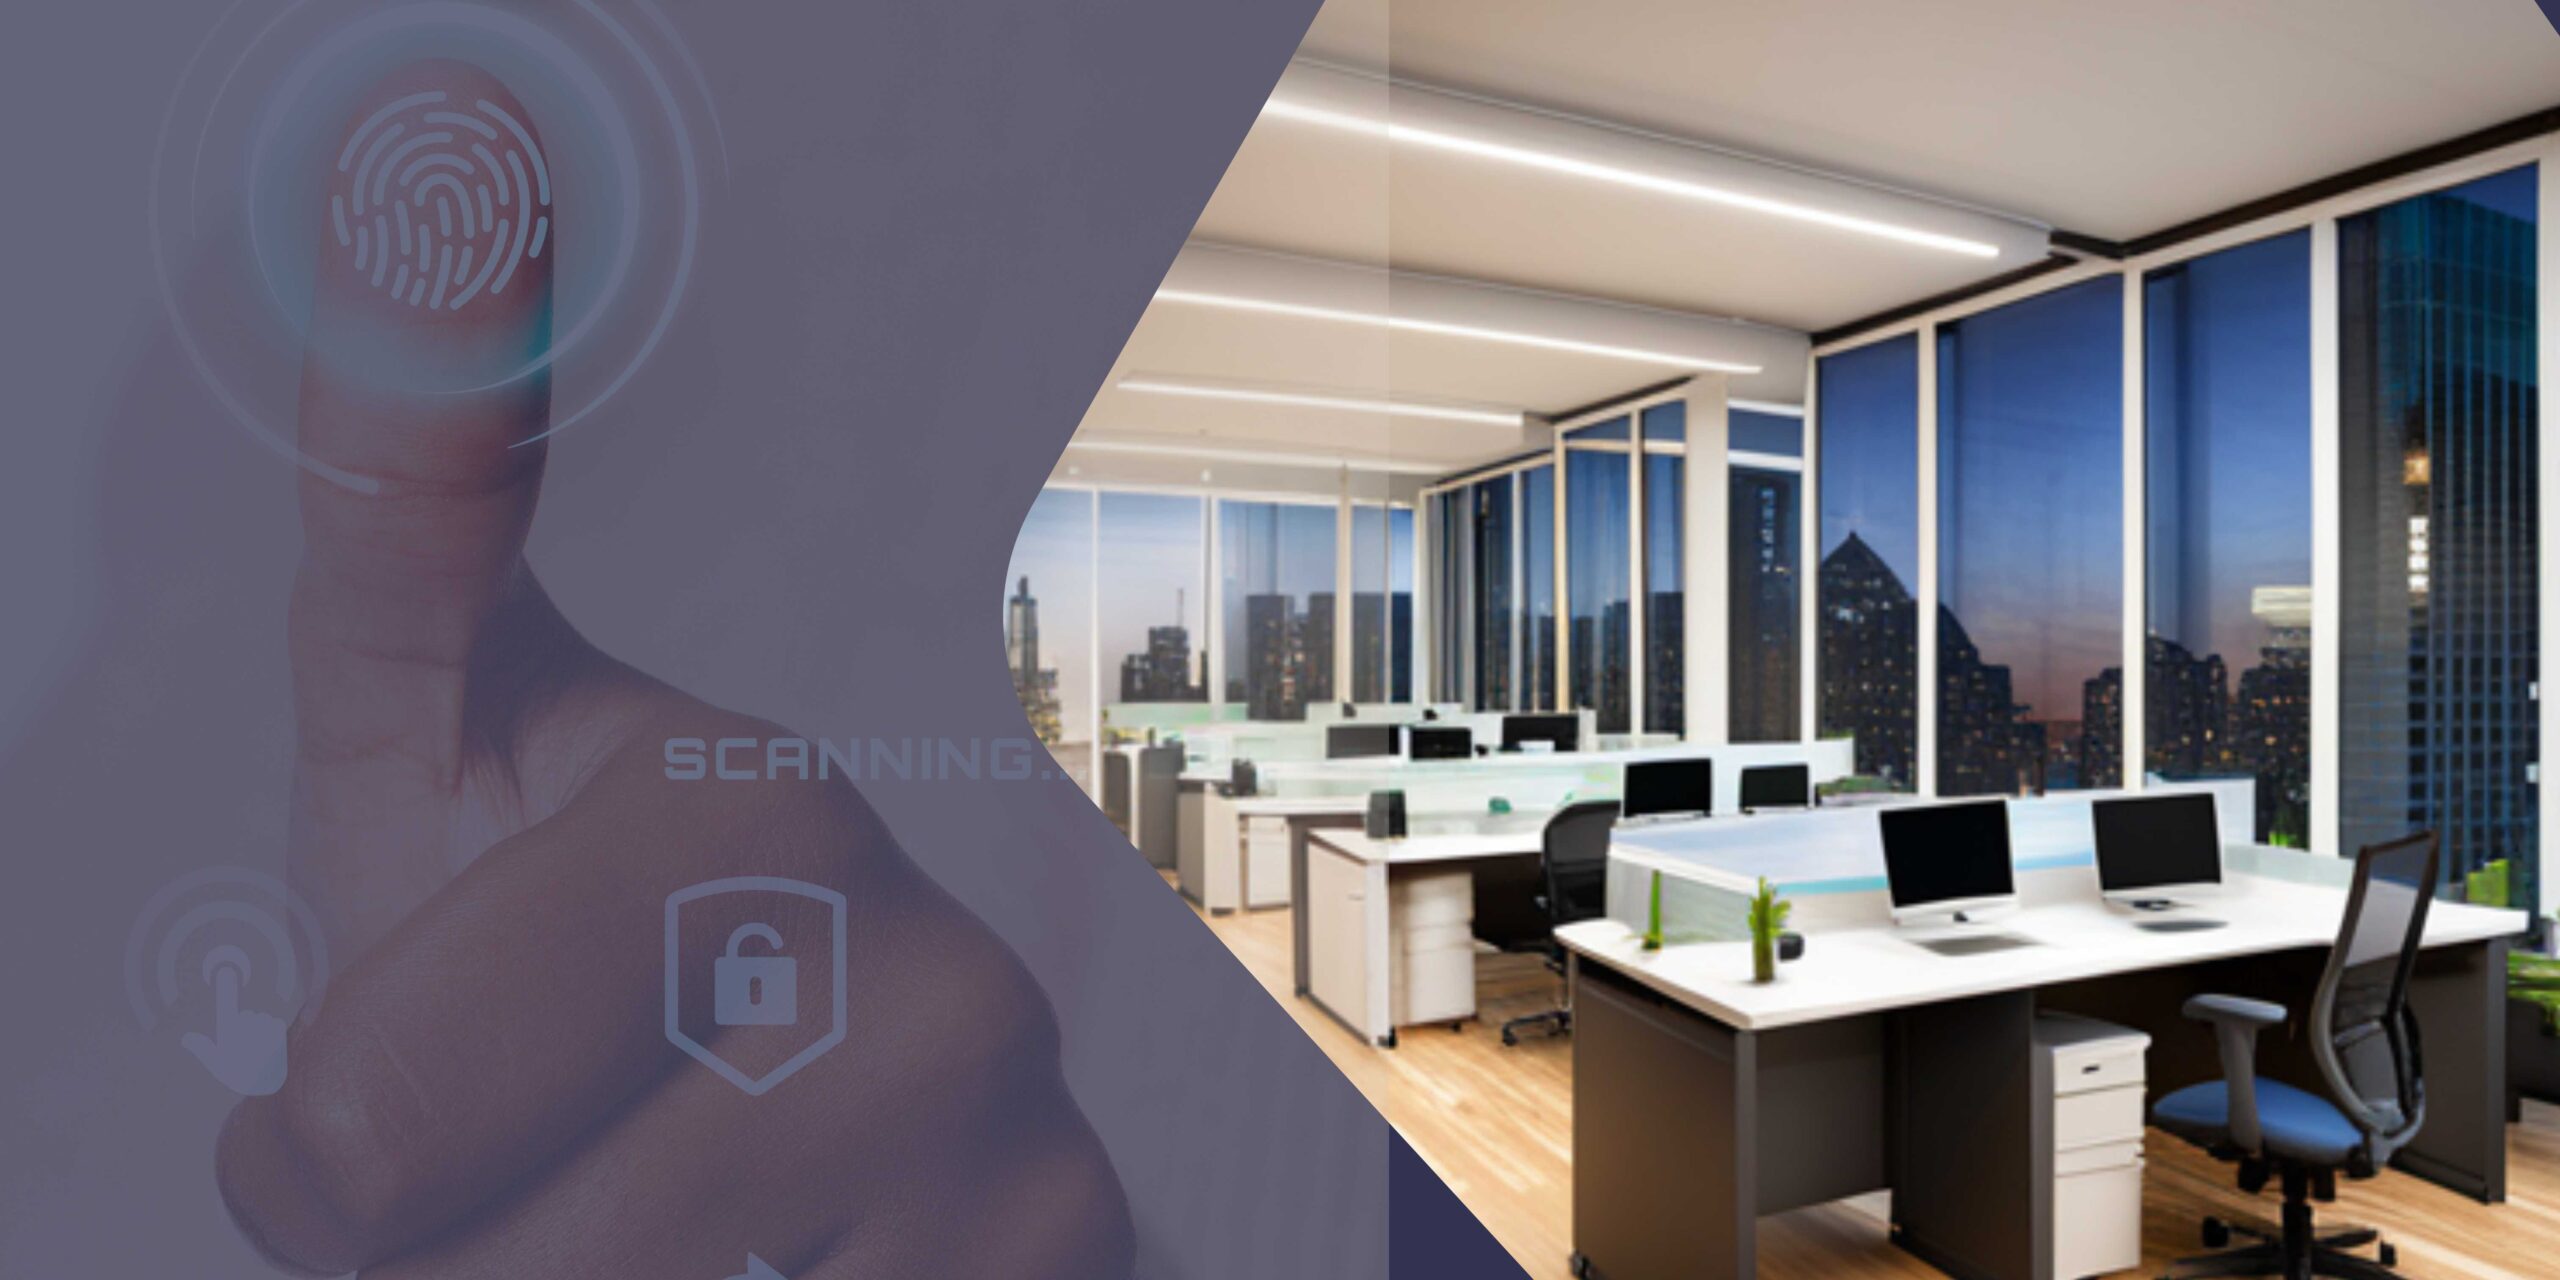 Enhancing Workspace Security with Biometric Access Control Solutions